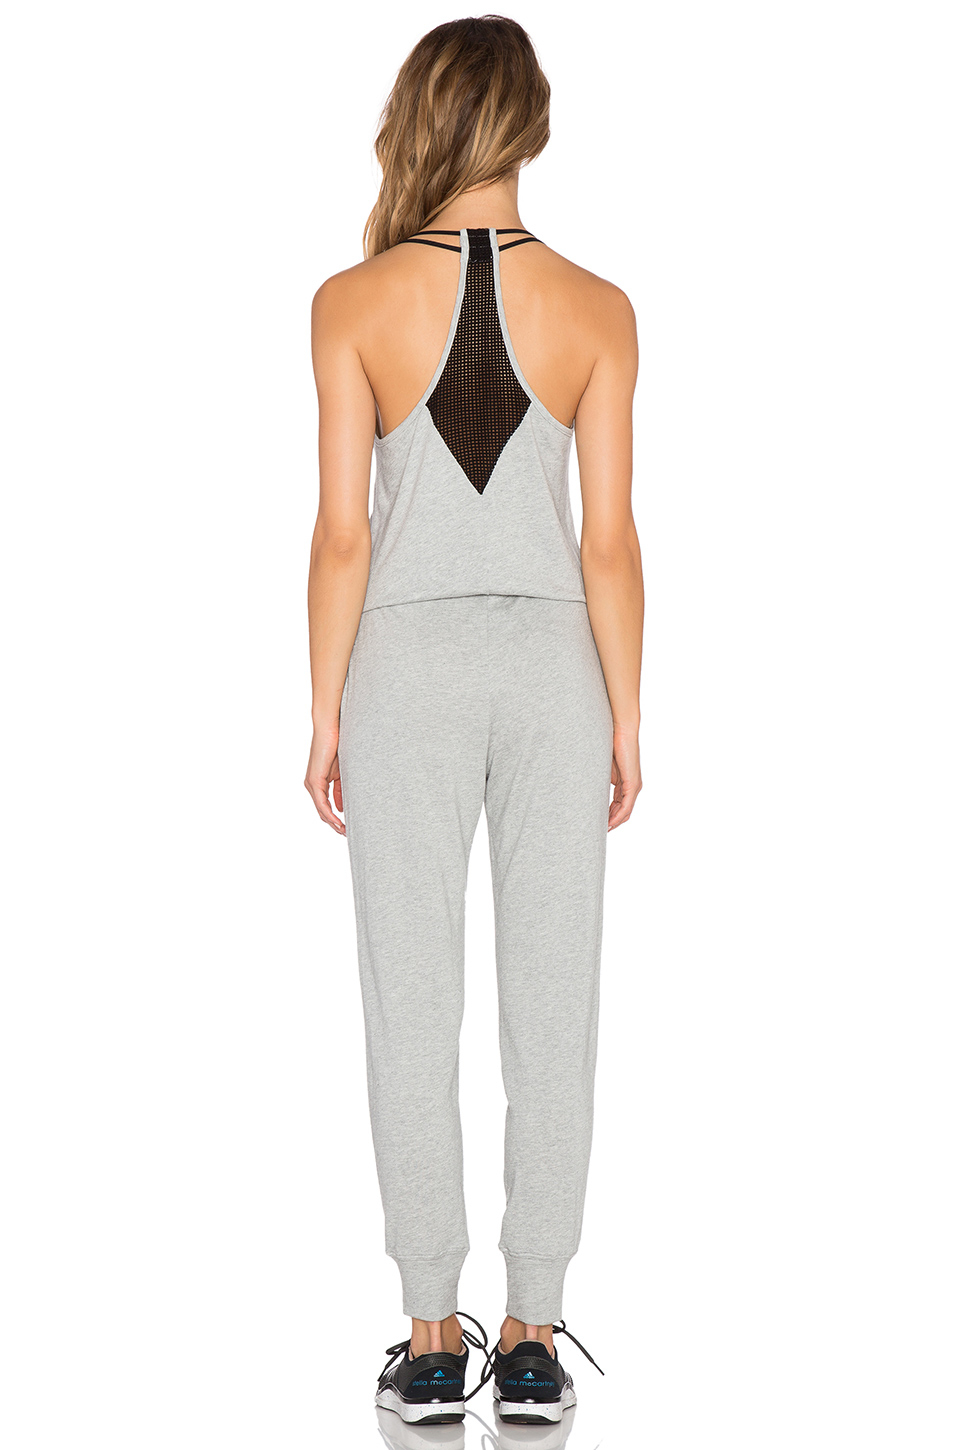 Lyst - Beyond Yoga French Terry Mesh Back Jumpsuit in Gray